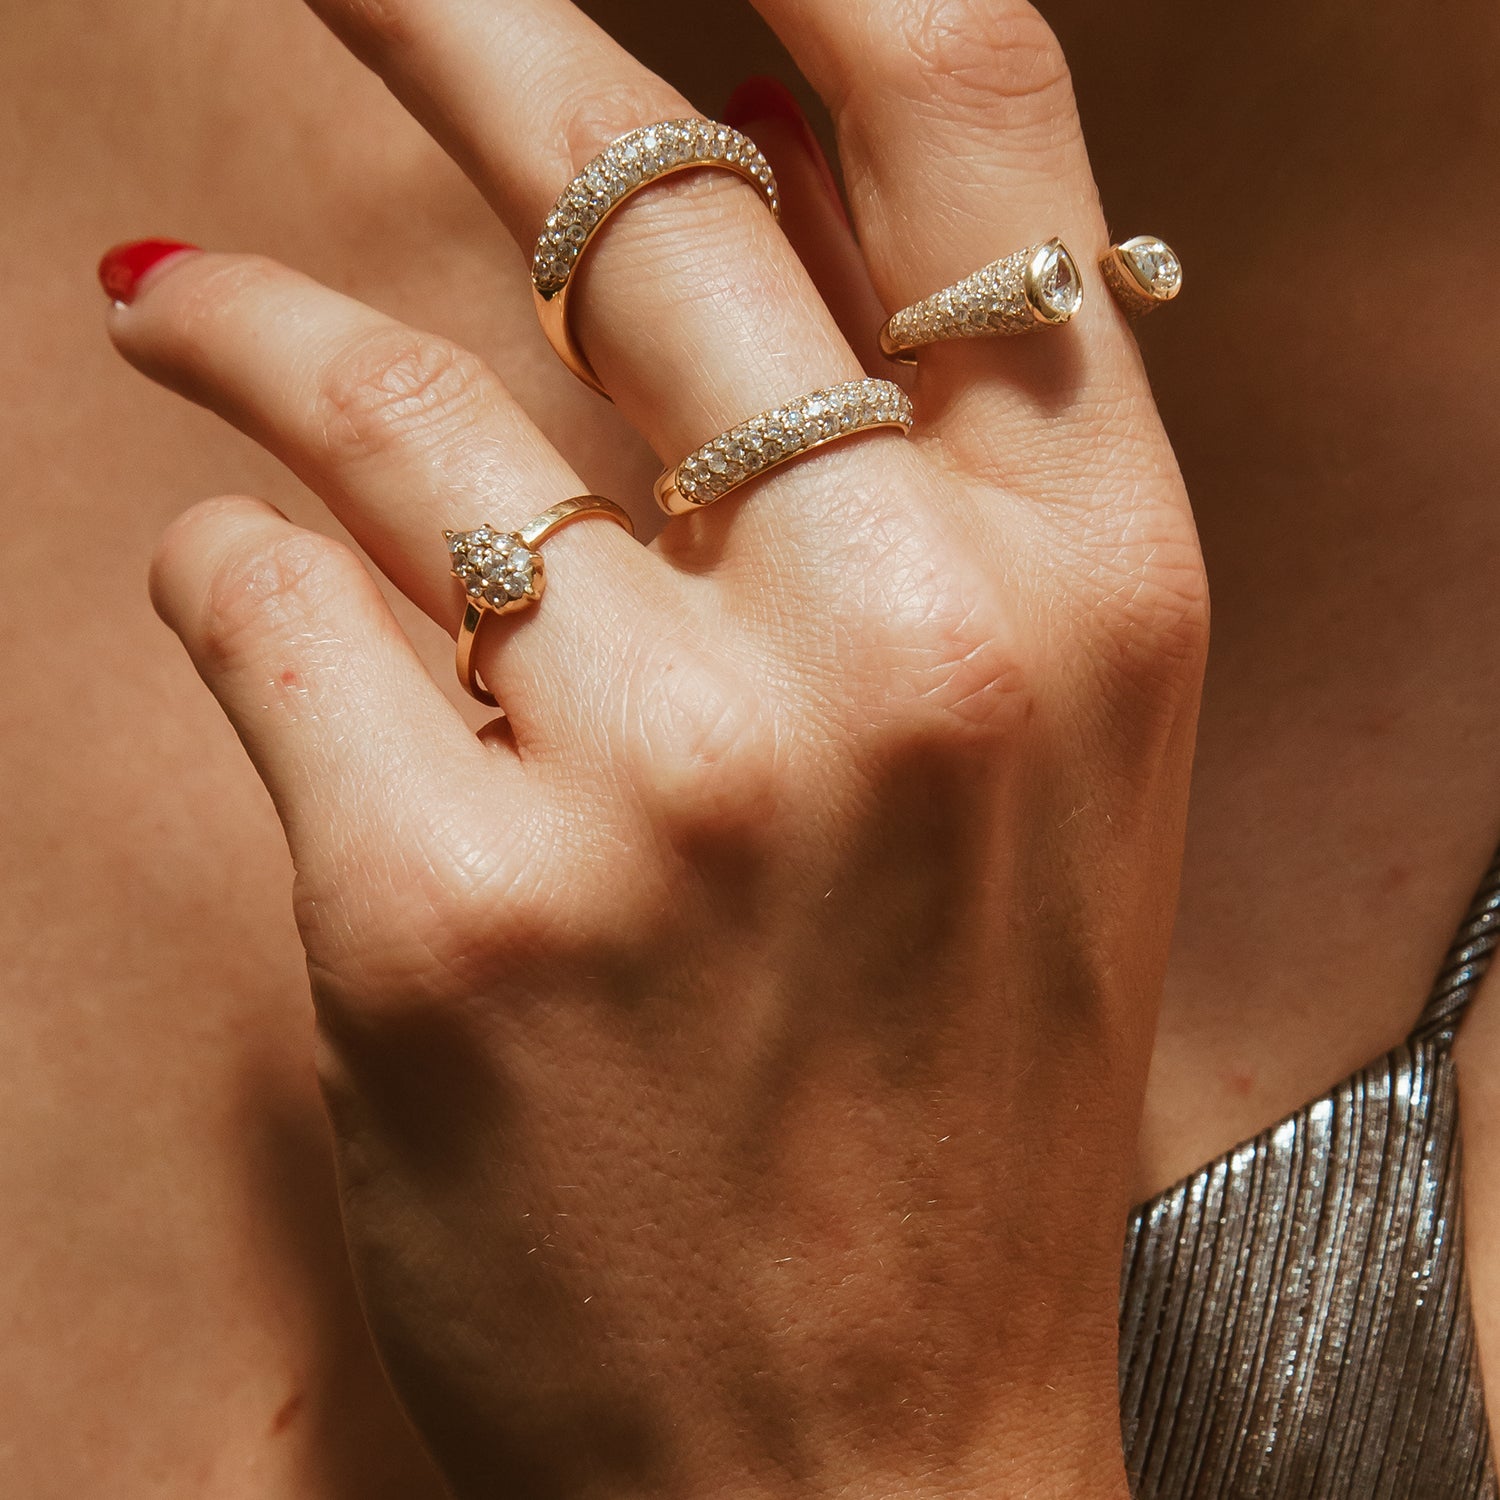 The Mini Twin Ring shown paired with the Olympus Ring and Elixir Mini Ring.